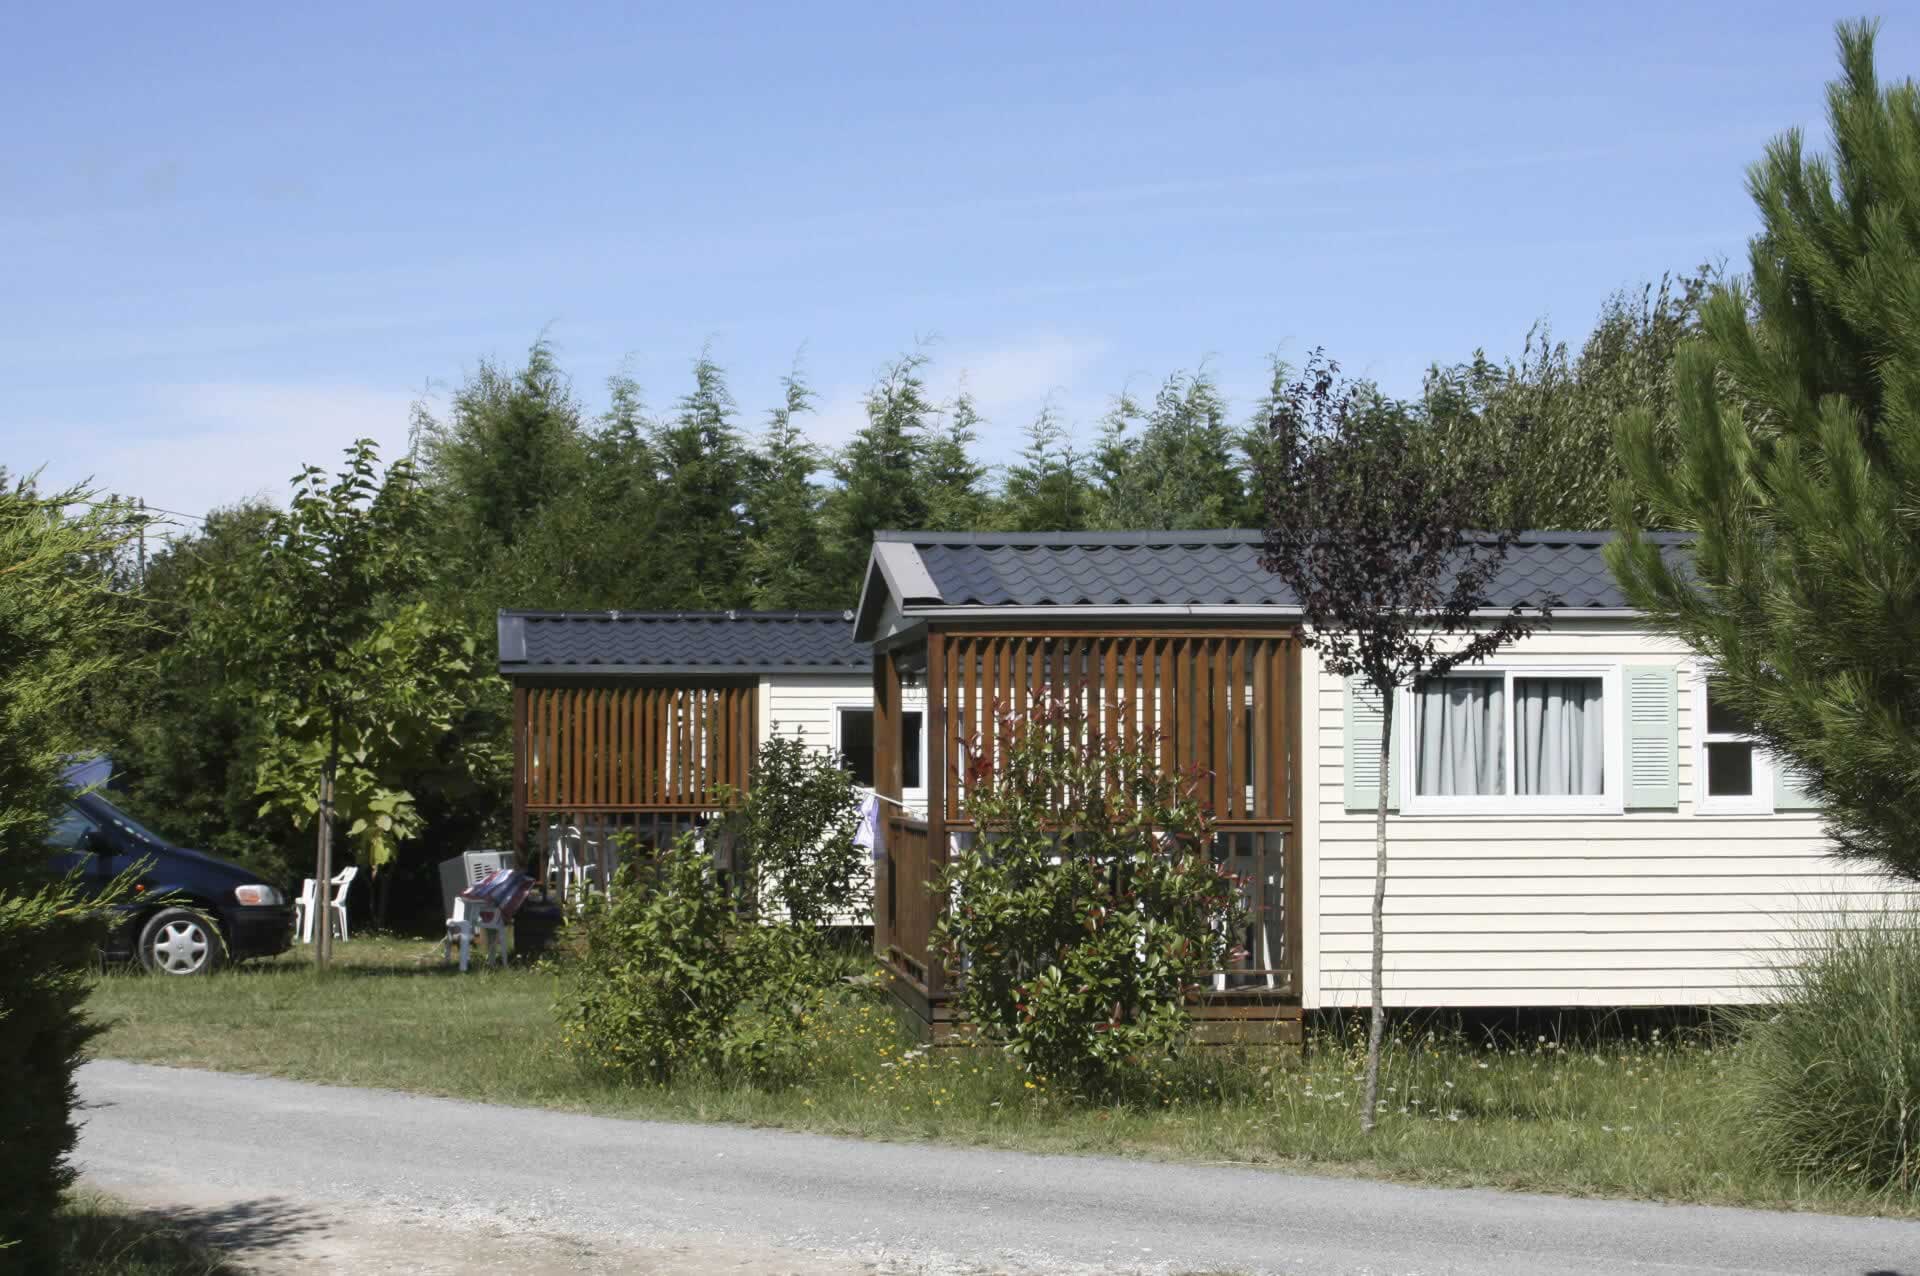 Spacious and fully equipped mobile homes